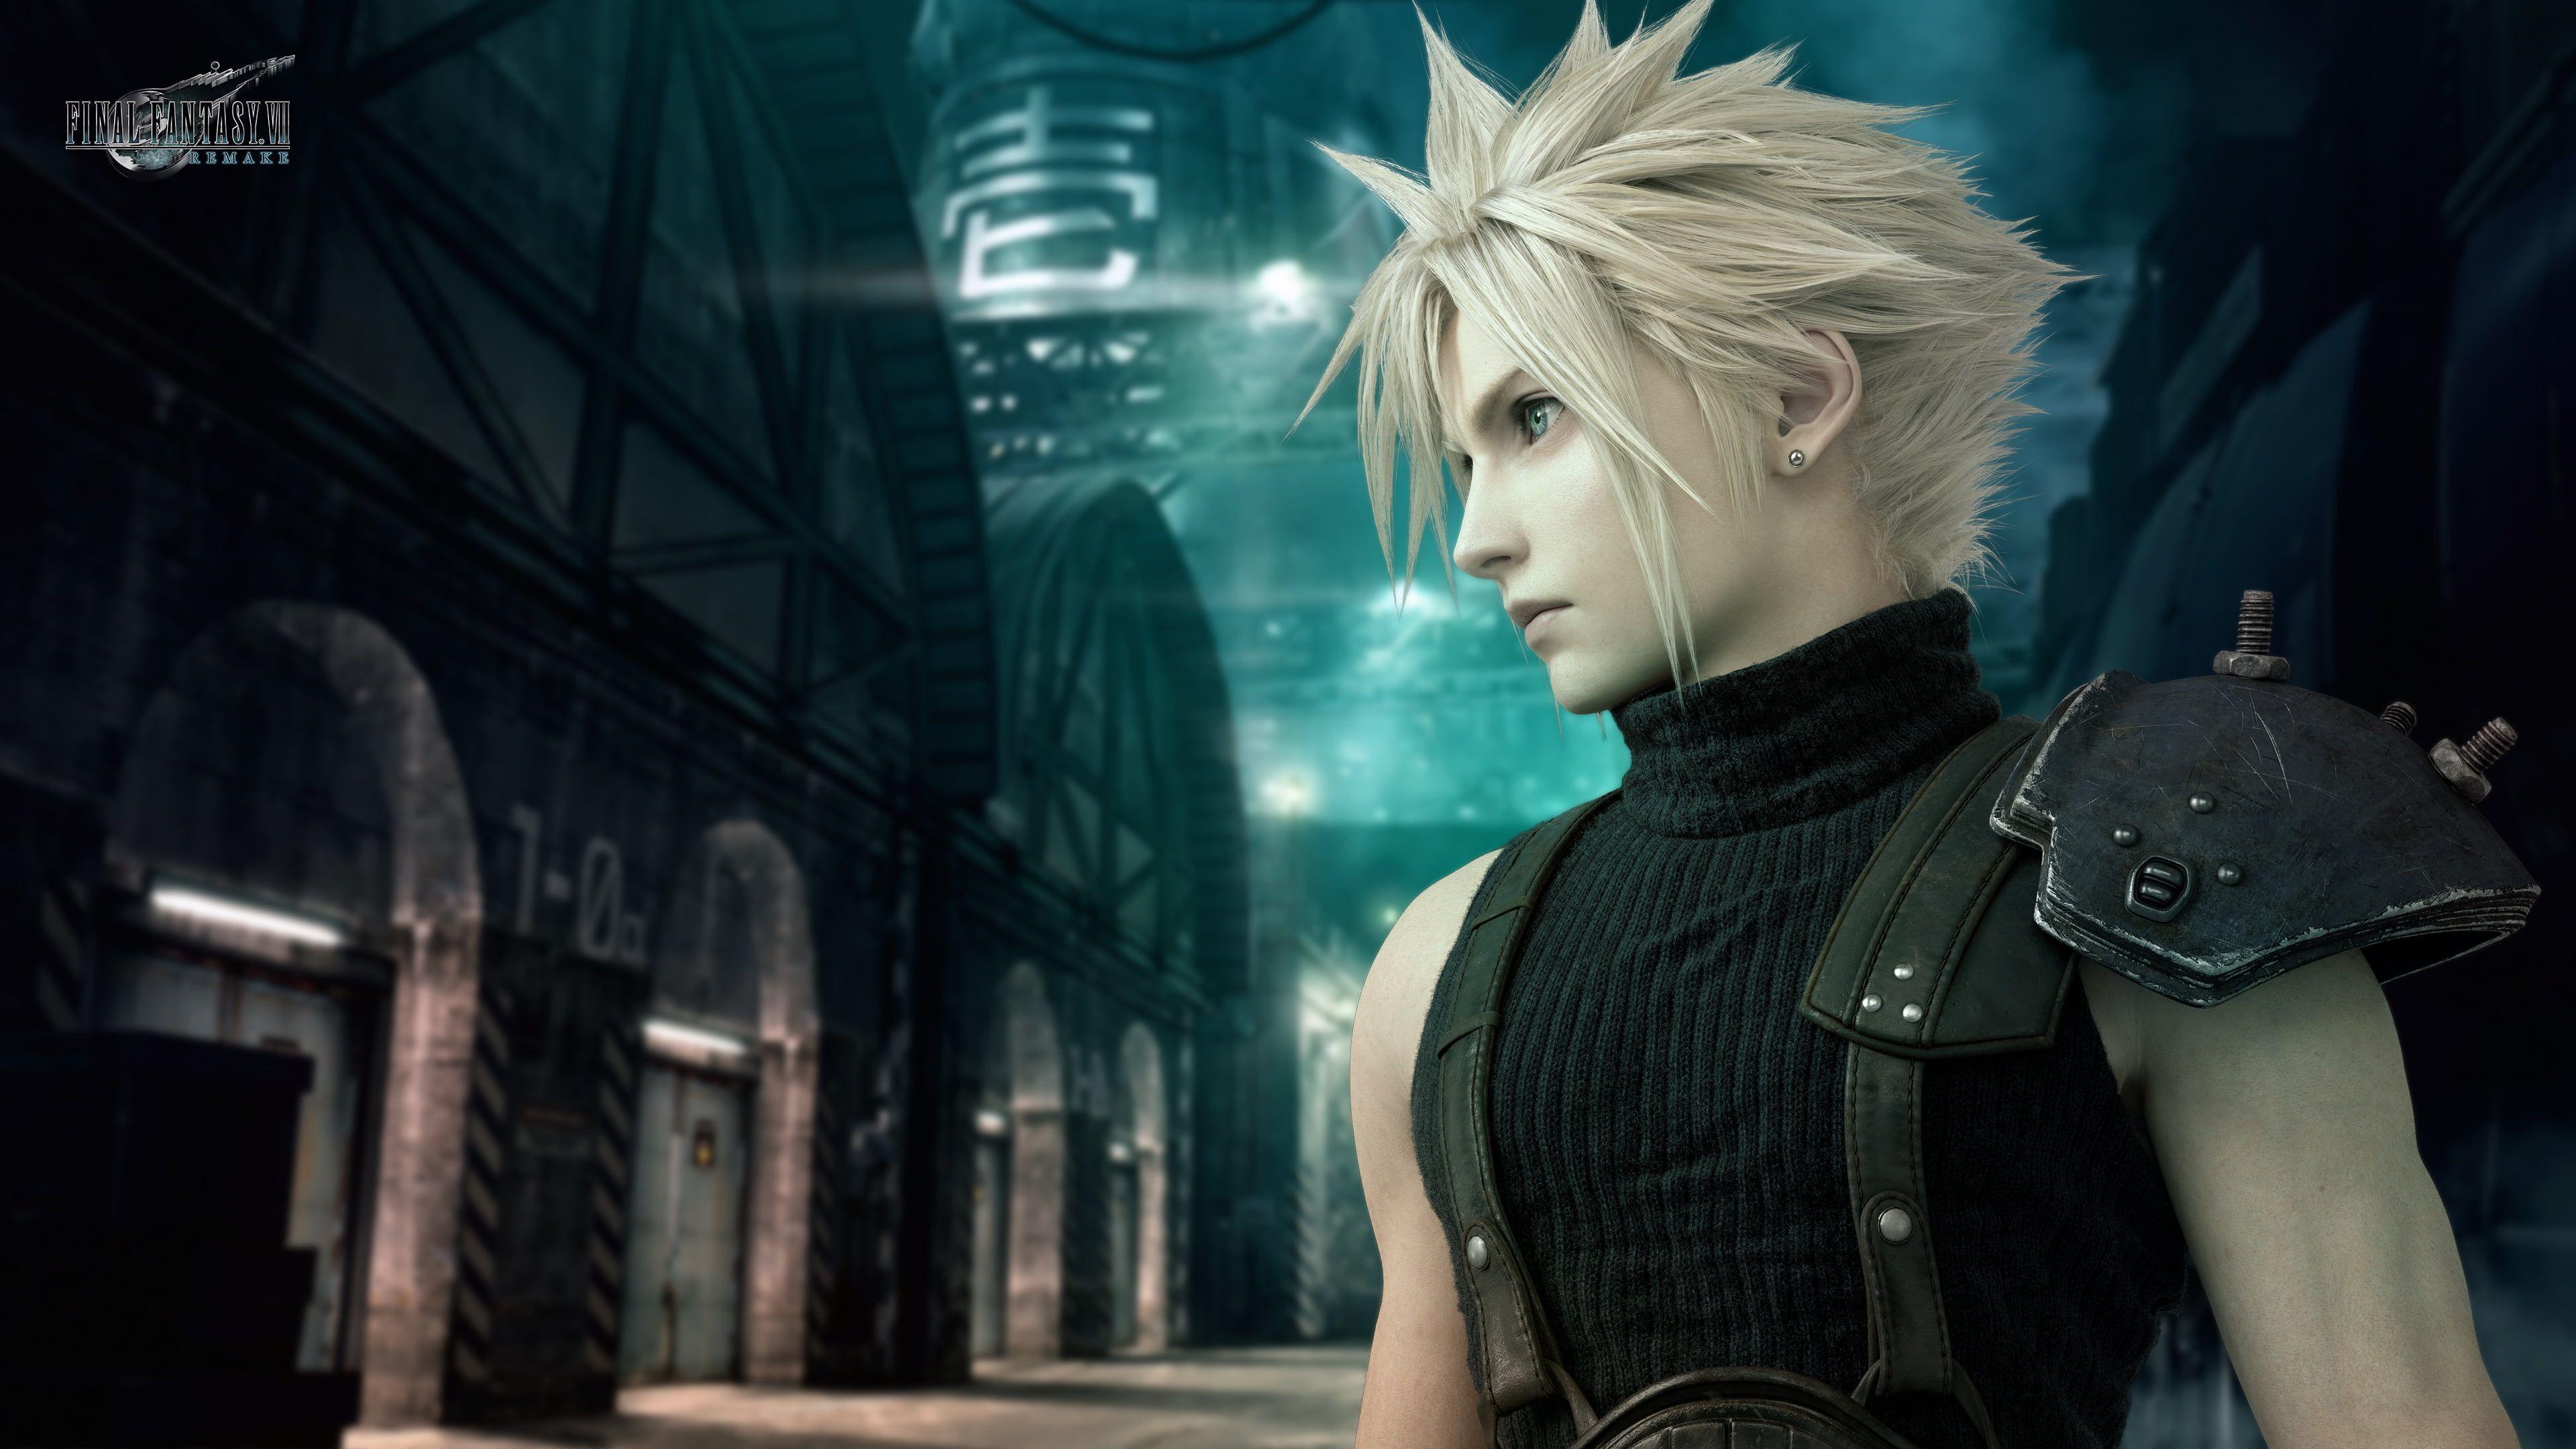 Cloud Ff7 Remake Wallpapers Top Free Cloud Ff7 Remake Backgrounds Wallpaperaccess